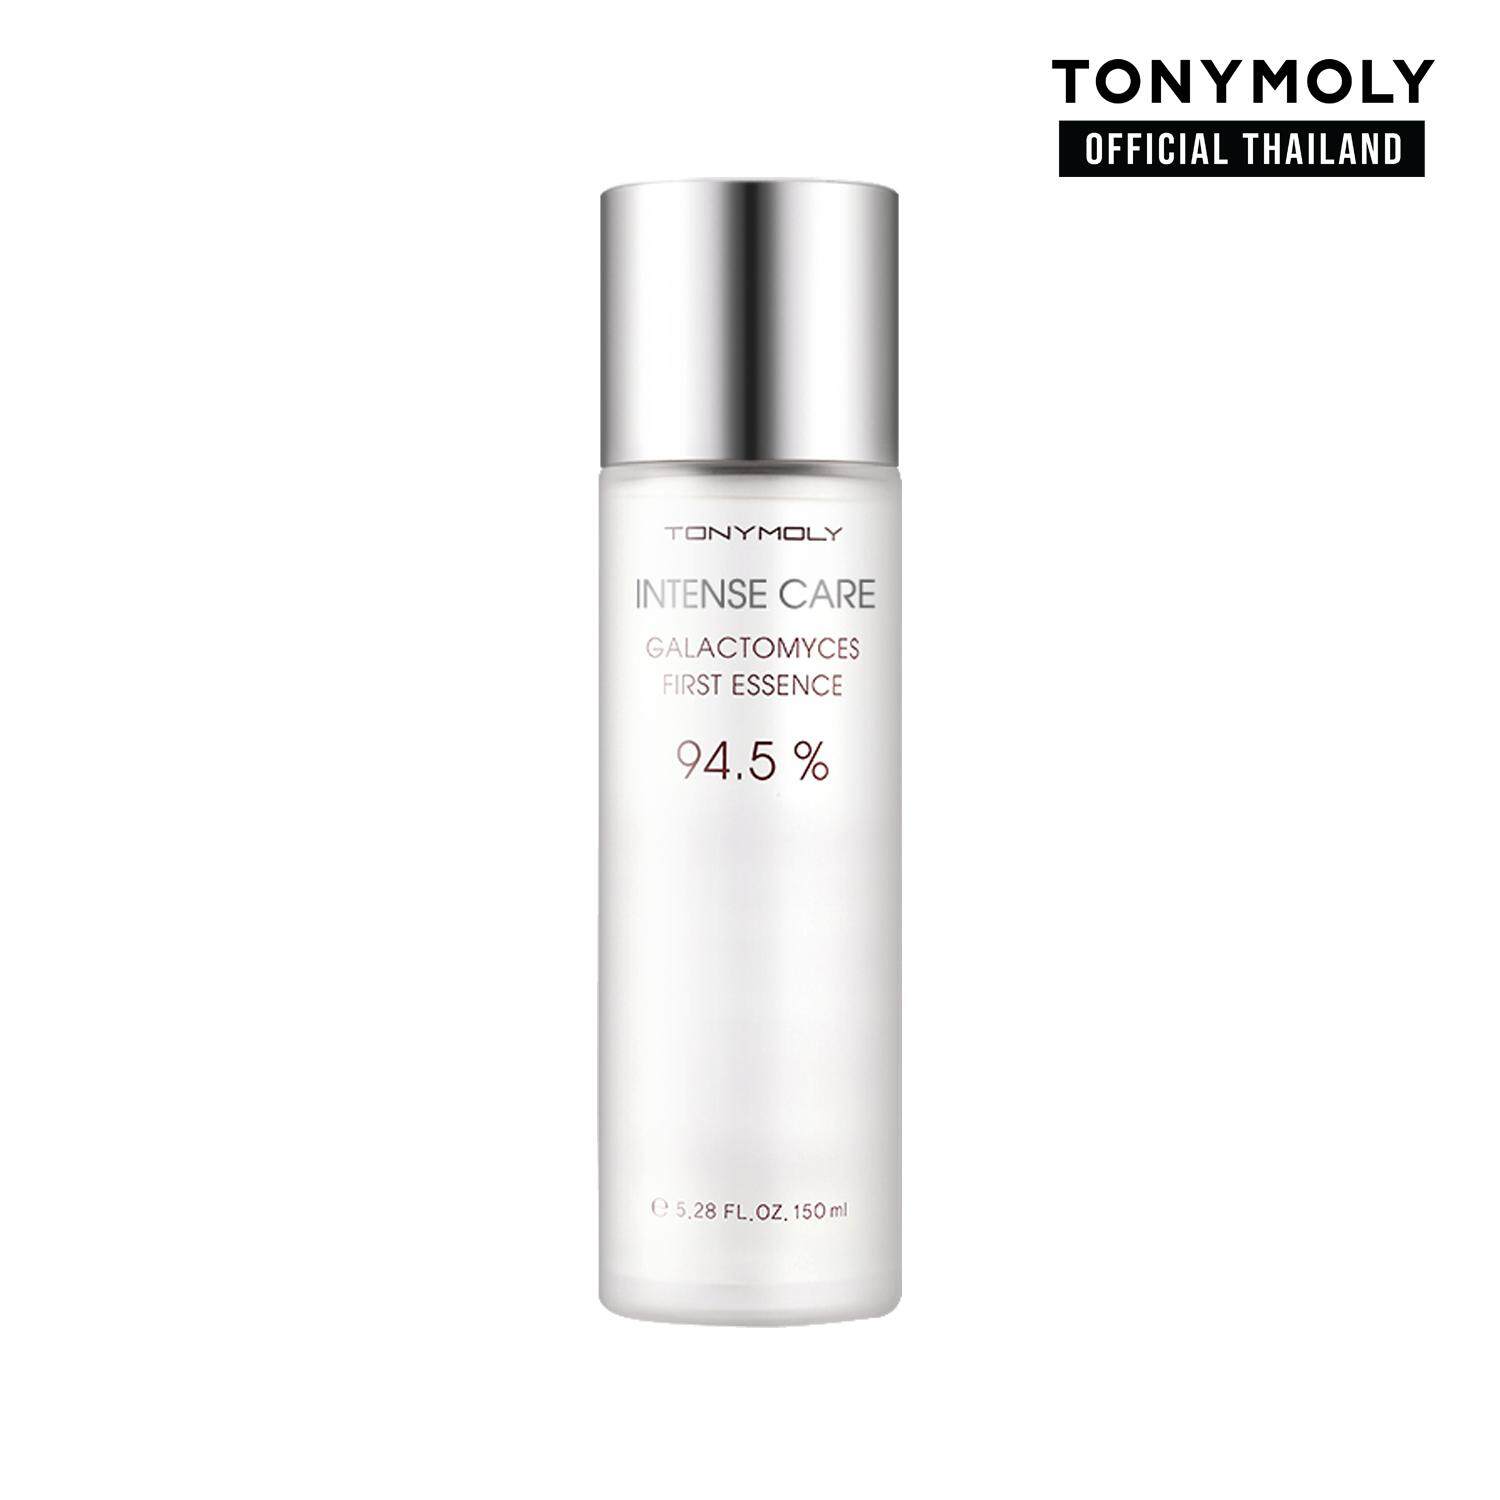 TONYMOLY INTENSE CARE GALACTOMYCES FIRST ESSENCE